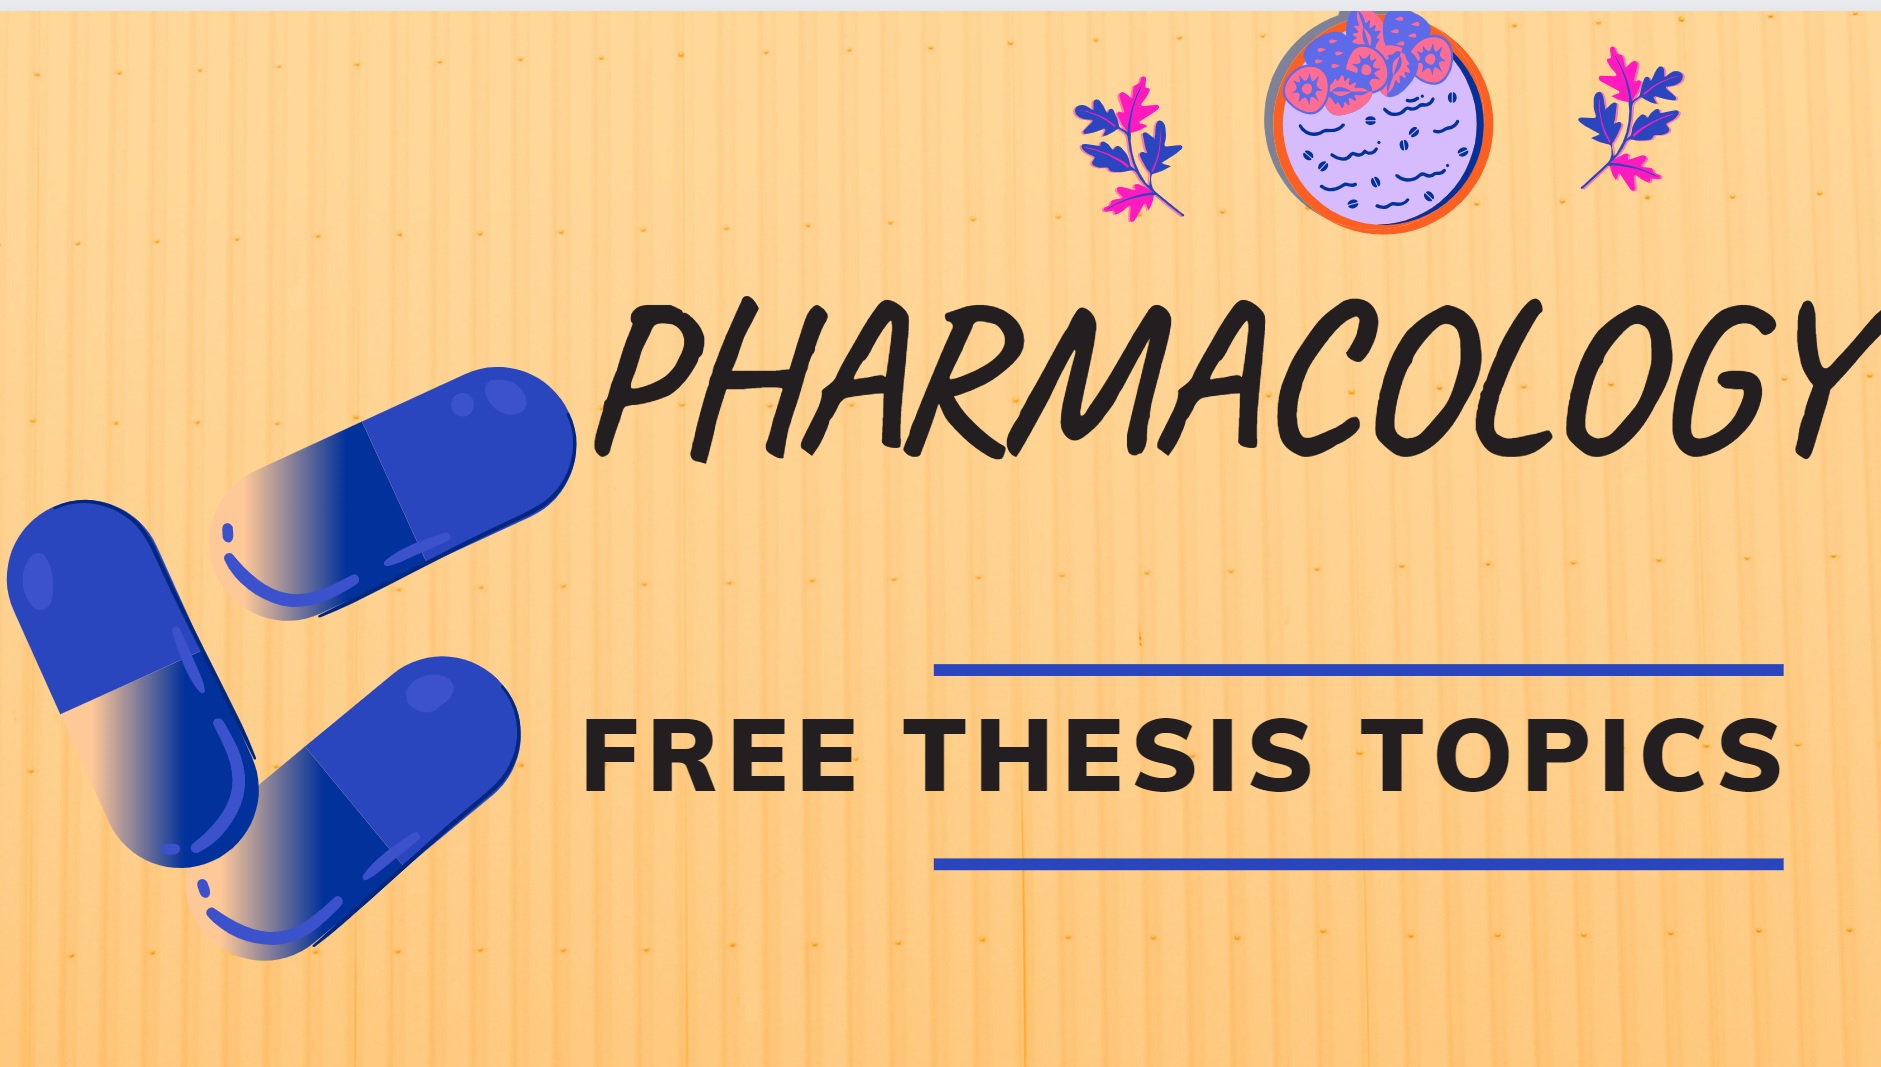 md pharmacology thesis topics